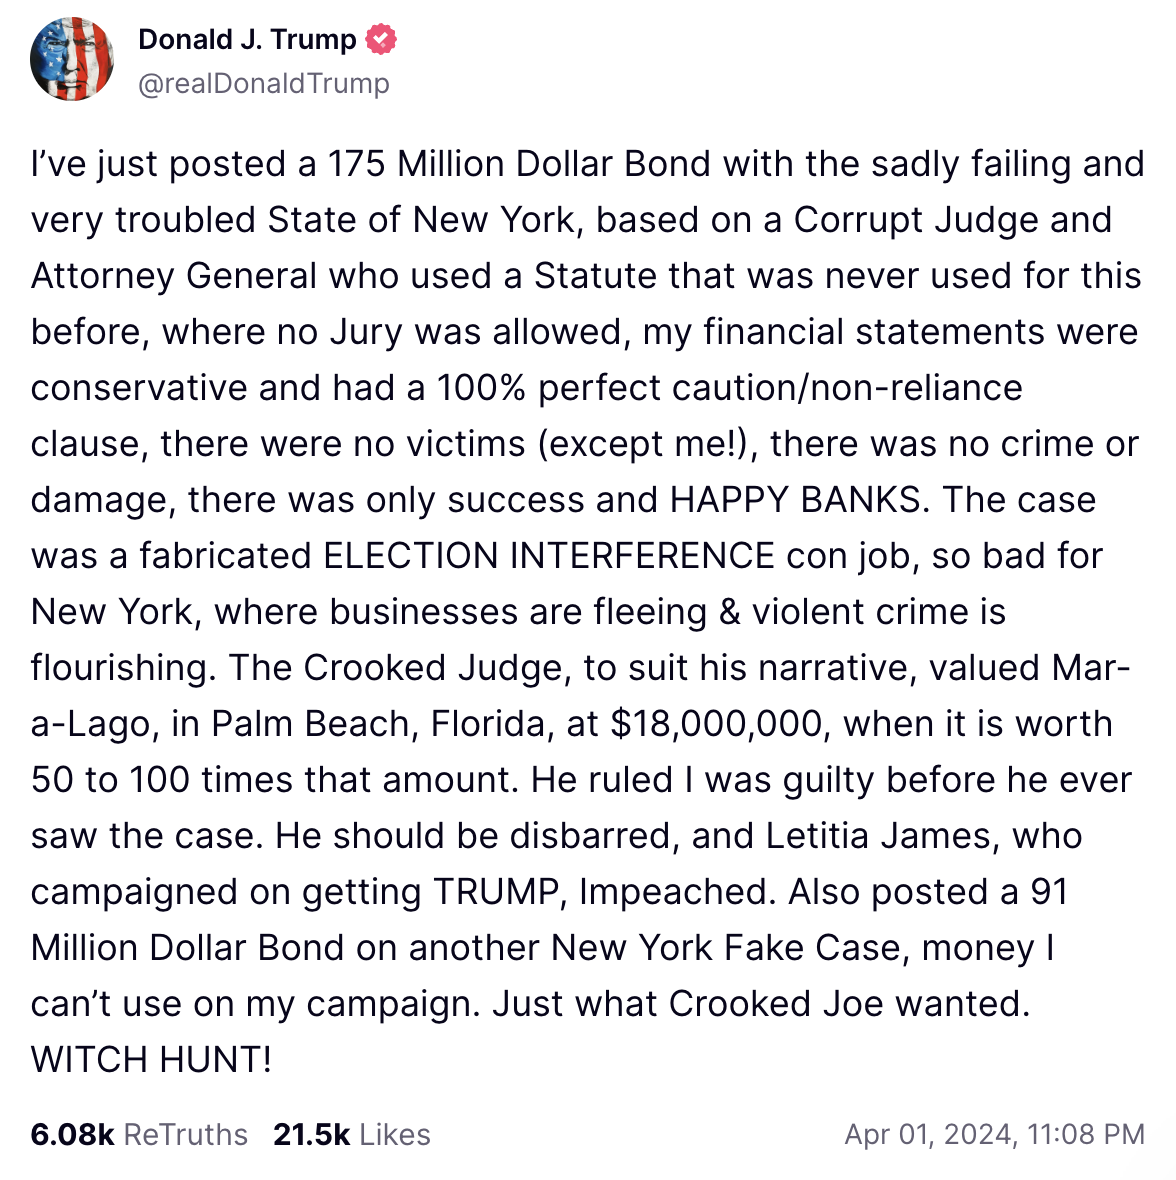 Trump Truth Social post April 1: I’ve just posted a 175 Million Dollar Bond with the sadly failing and very troubled State of New York, based on a Corrupt Judge and Attorney General who used a Statute that was never used for this before, where no Jury was allowed, my financial statements were conservative and had a 100% perfect caution/non-reliance clause, there were no victims (except me!), there was no crime or damage, there was only success and HAPPY BANKS. The case was a fabricated ELECTION INTERFERENCE con job, so bad for New York, where businesses are fleeing & violent crime is flourishing. The Crooked Judge, to suit his narrative, valued Mar-a-Lago, in Palm Beach, Florida, at $18,000,000, when it is worth 50 to 100 times that amount. He ruled I was guilty before he ever saw the case. He should be disbarred, and Letitia James, who campaigned on getting TRUMP, Impeached. Also posted a 91 Million Dollar Bond on another New York Fake Case, money I can’t use on my campaign. Just what Crooked Joe wanted. WITCH HUNT!